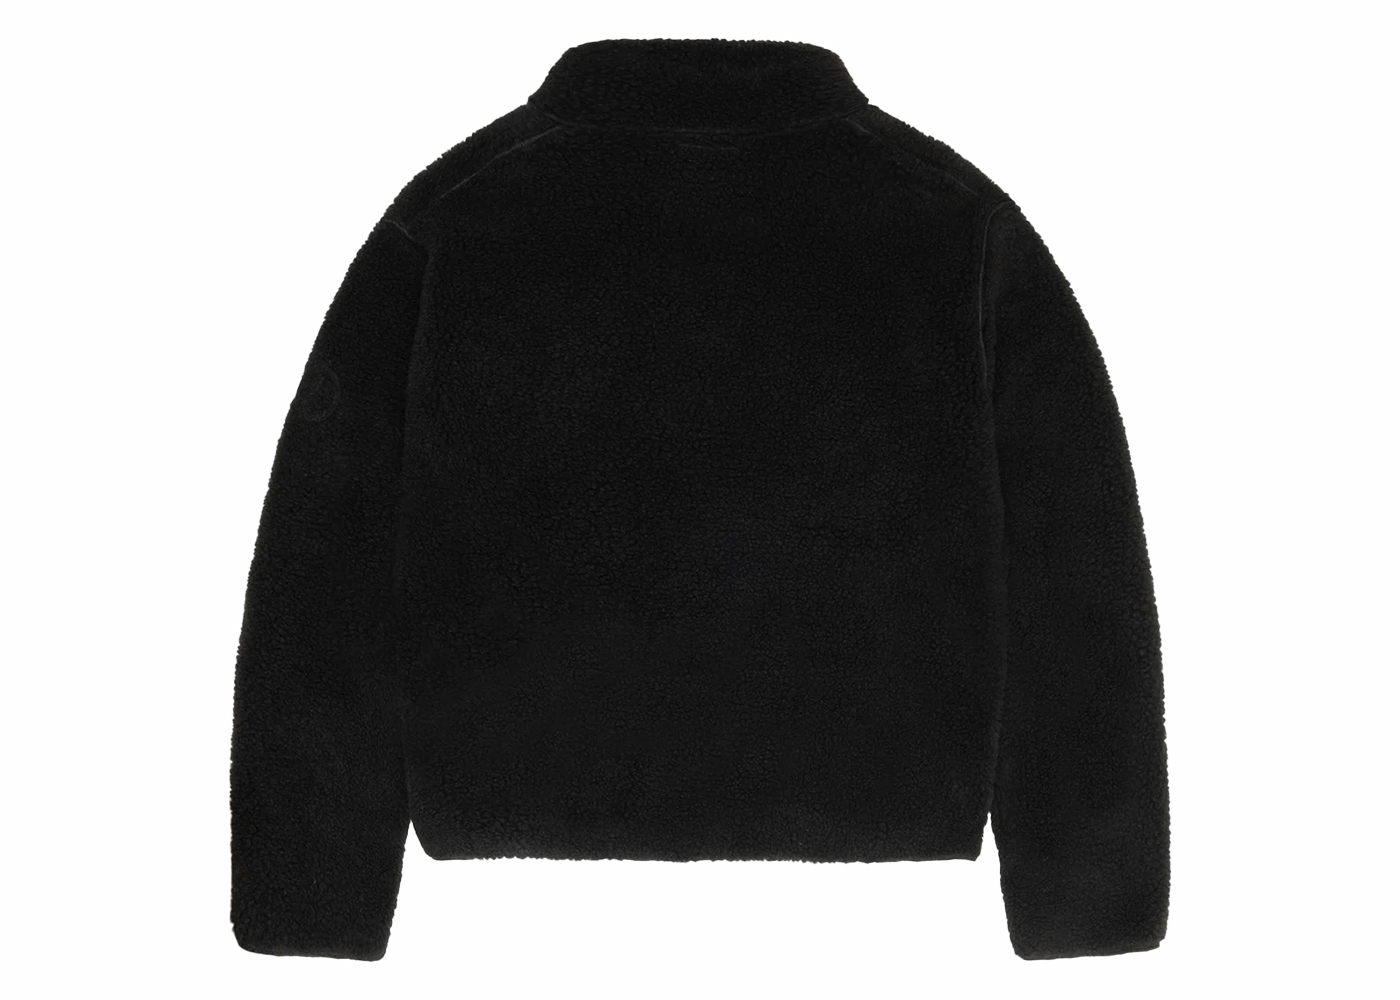 Stussy x Our Legacy Curly Fleece Runner Sweat Black